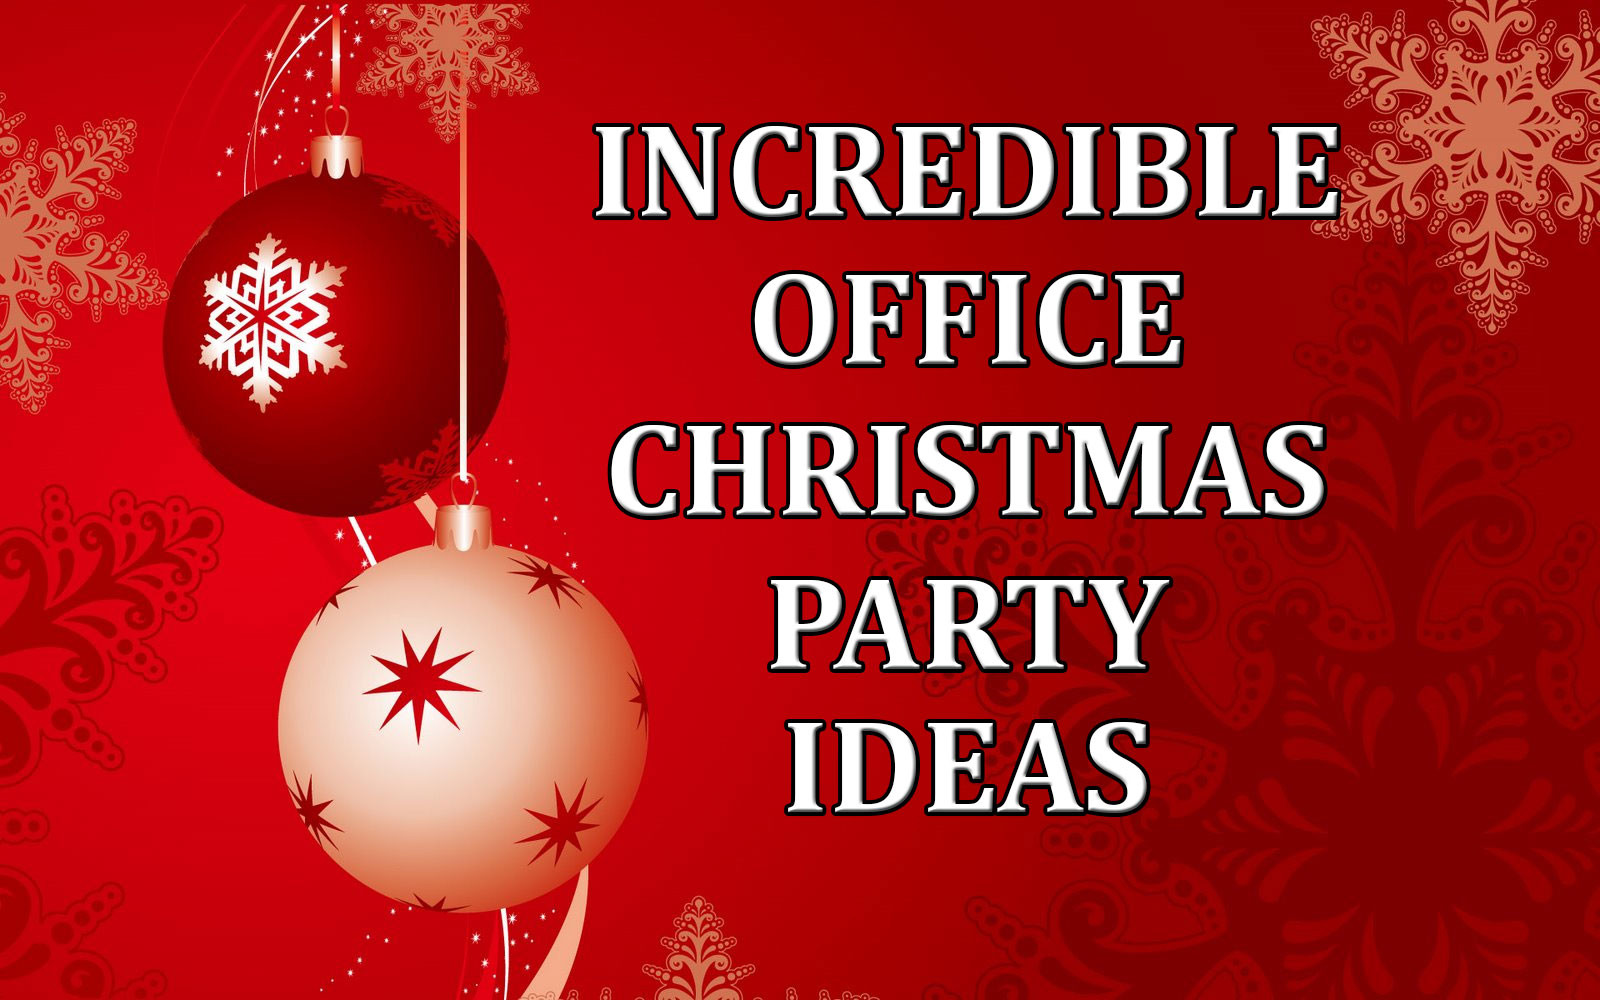 Small Office Holiday Party Ideas
 Incredible fice Christmas Party Ideas edy Ventriloquist